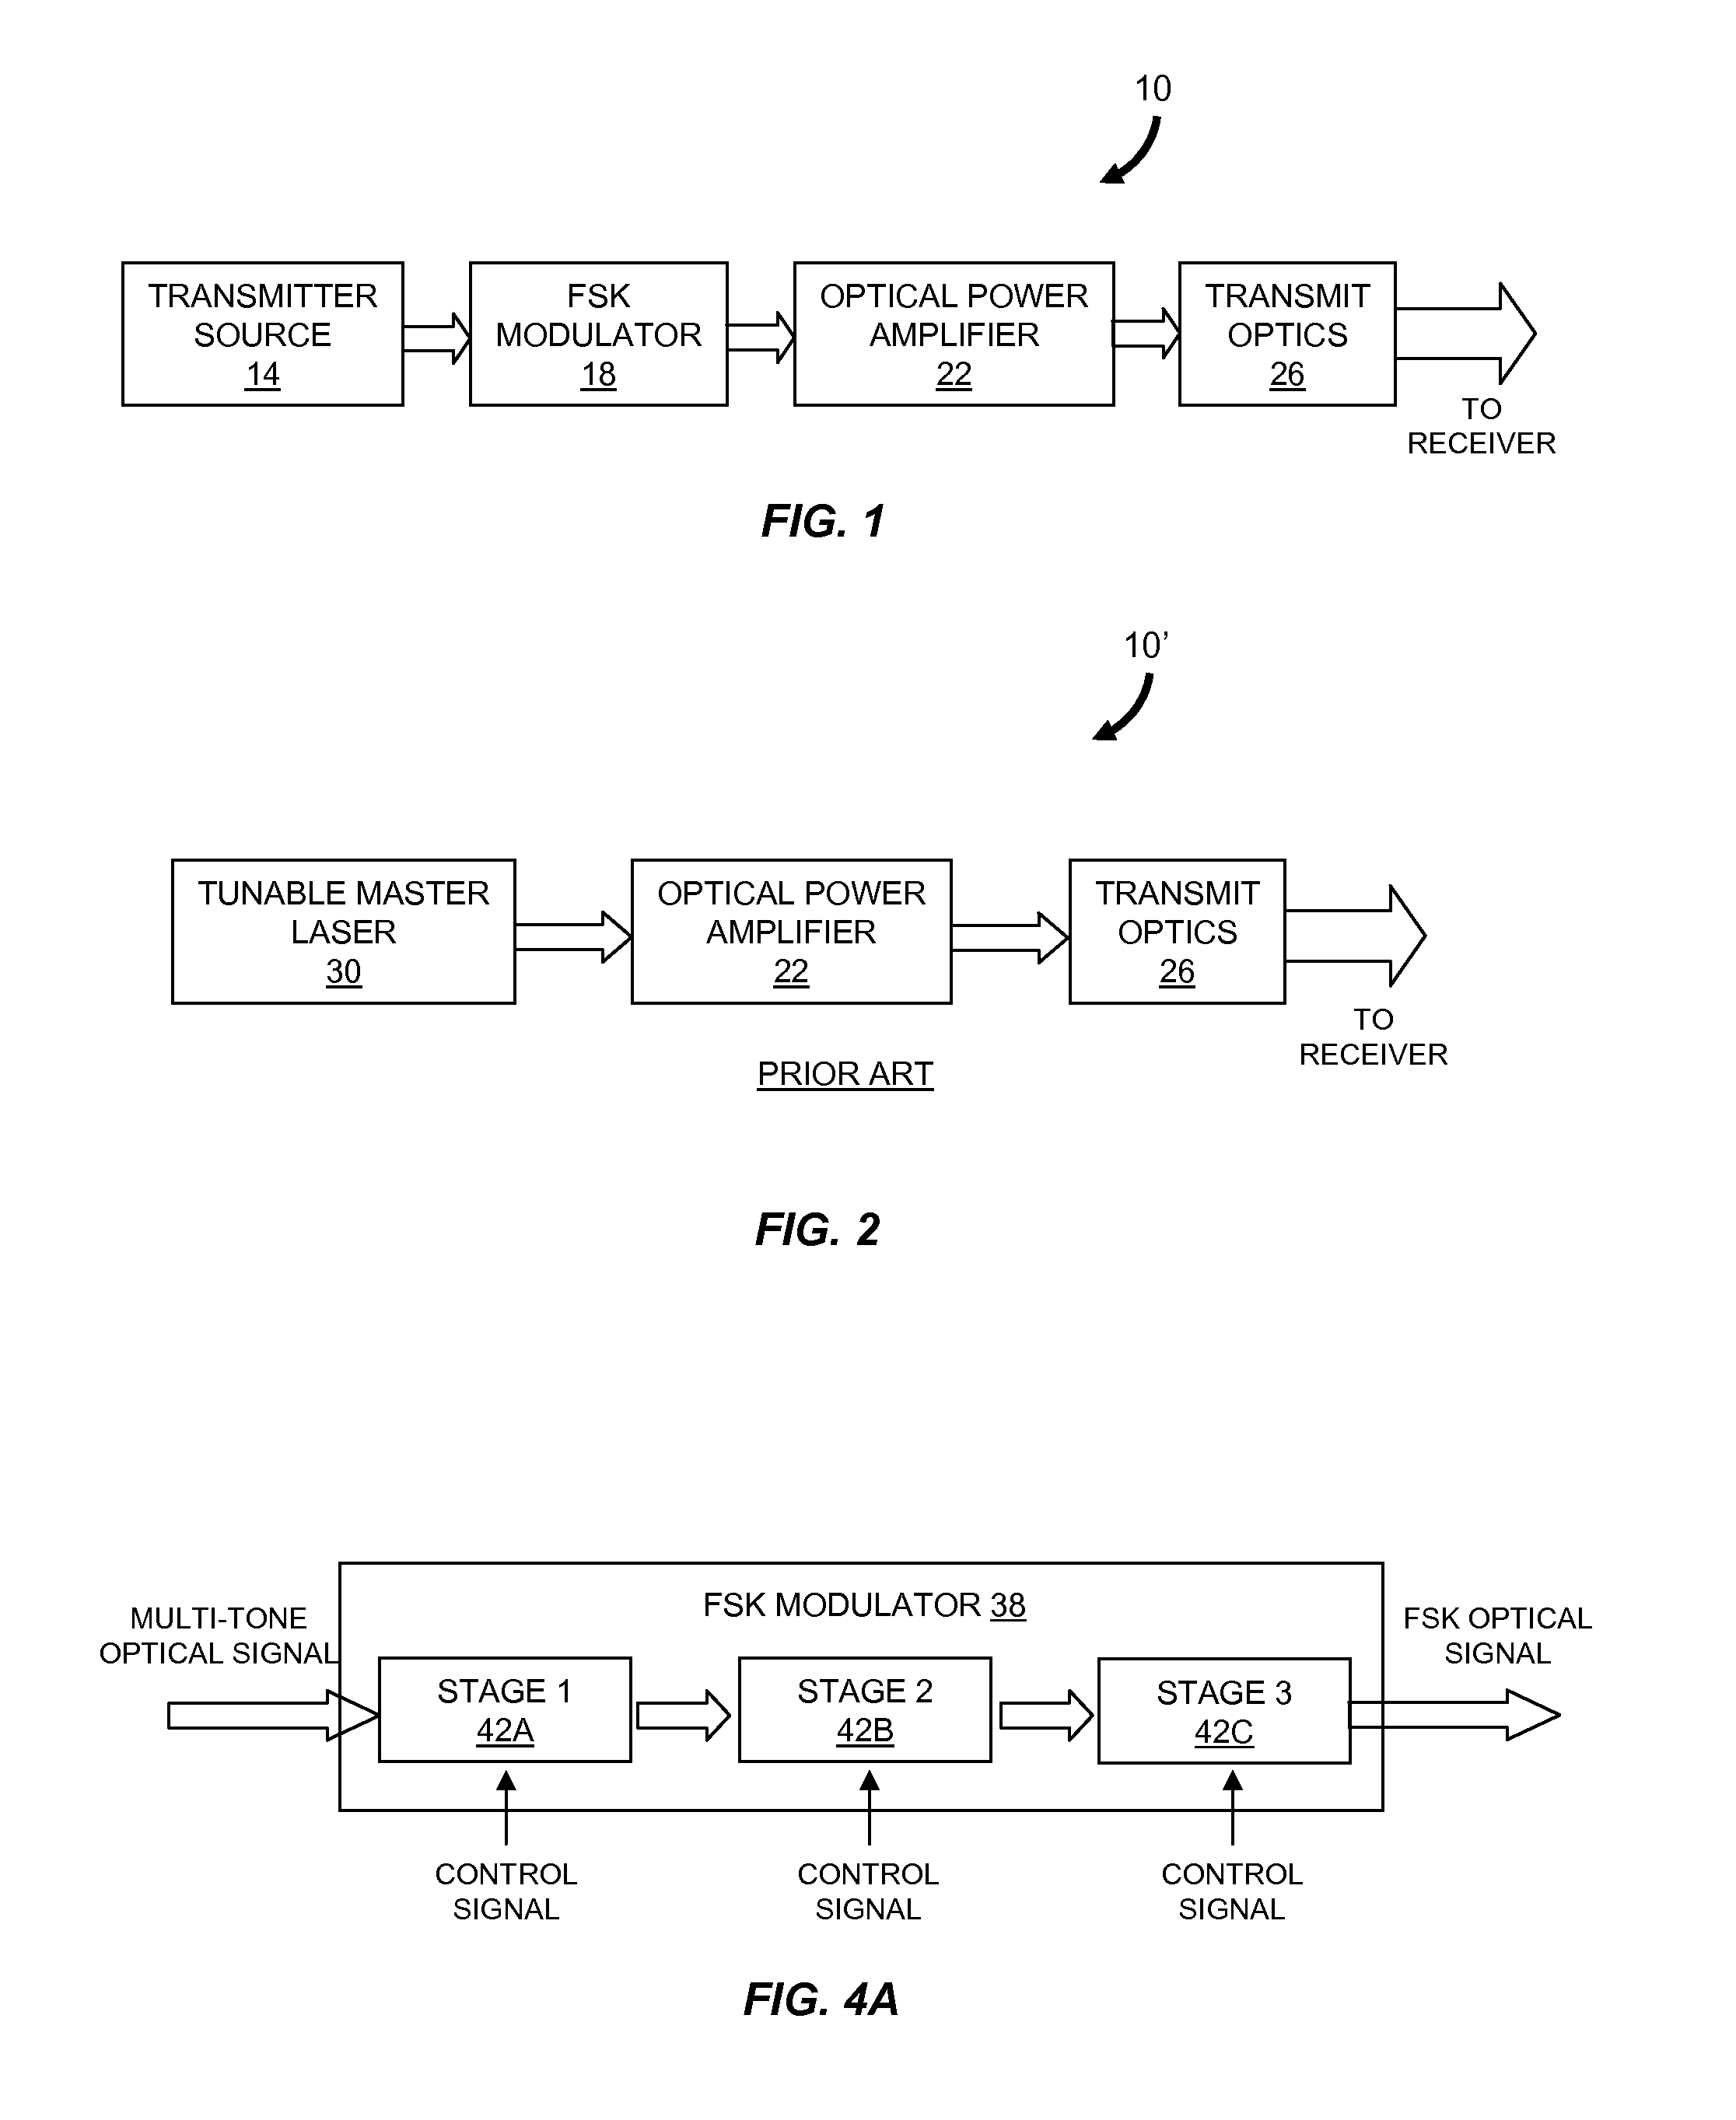 Modulator for frequency-shift keying of optical signals